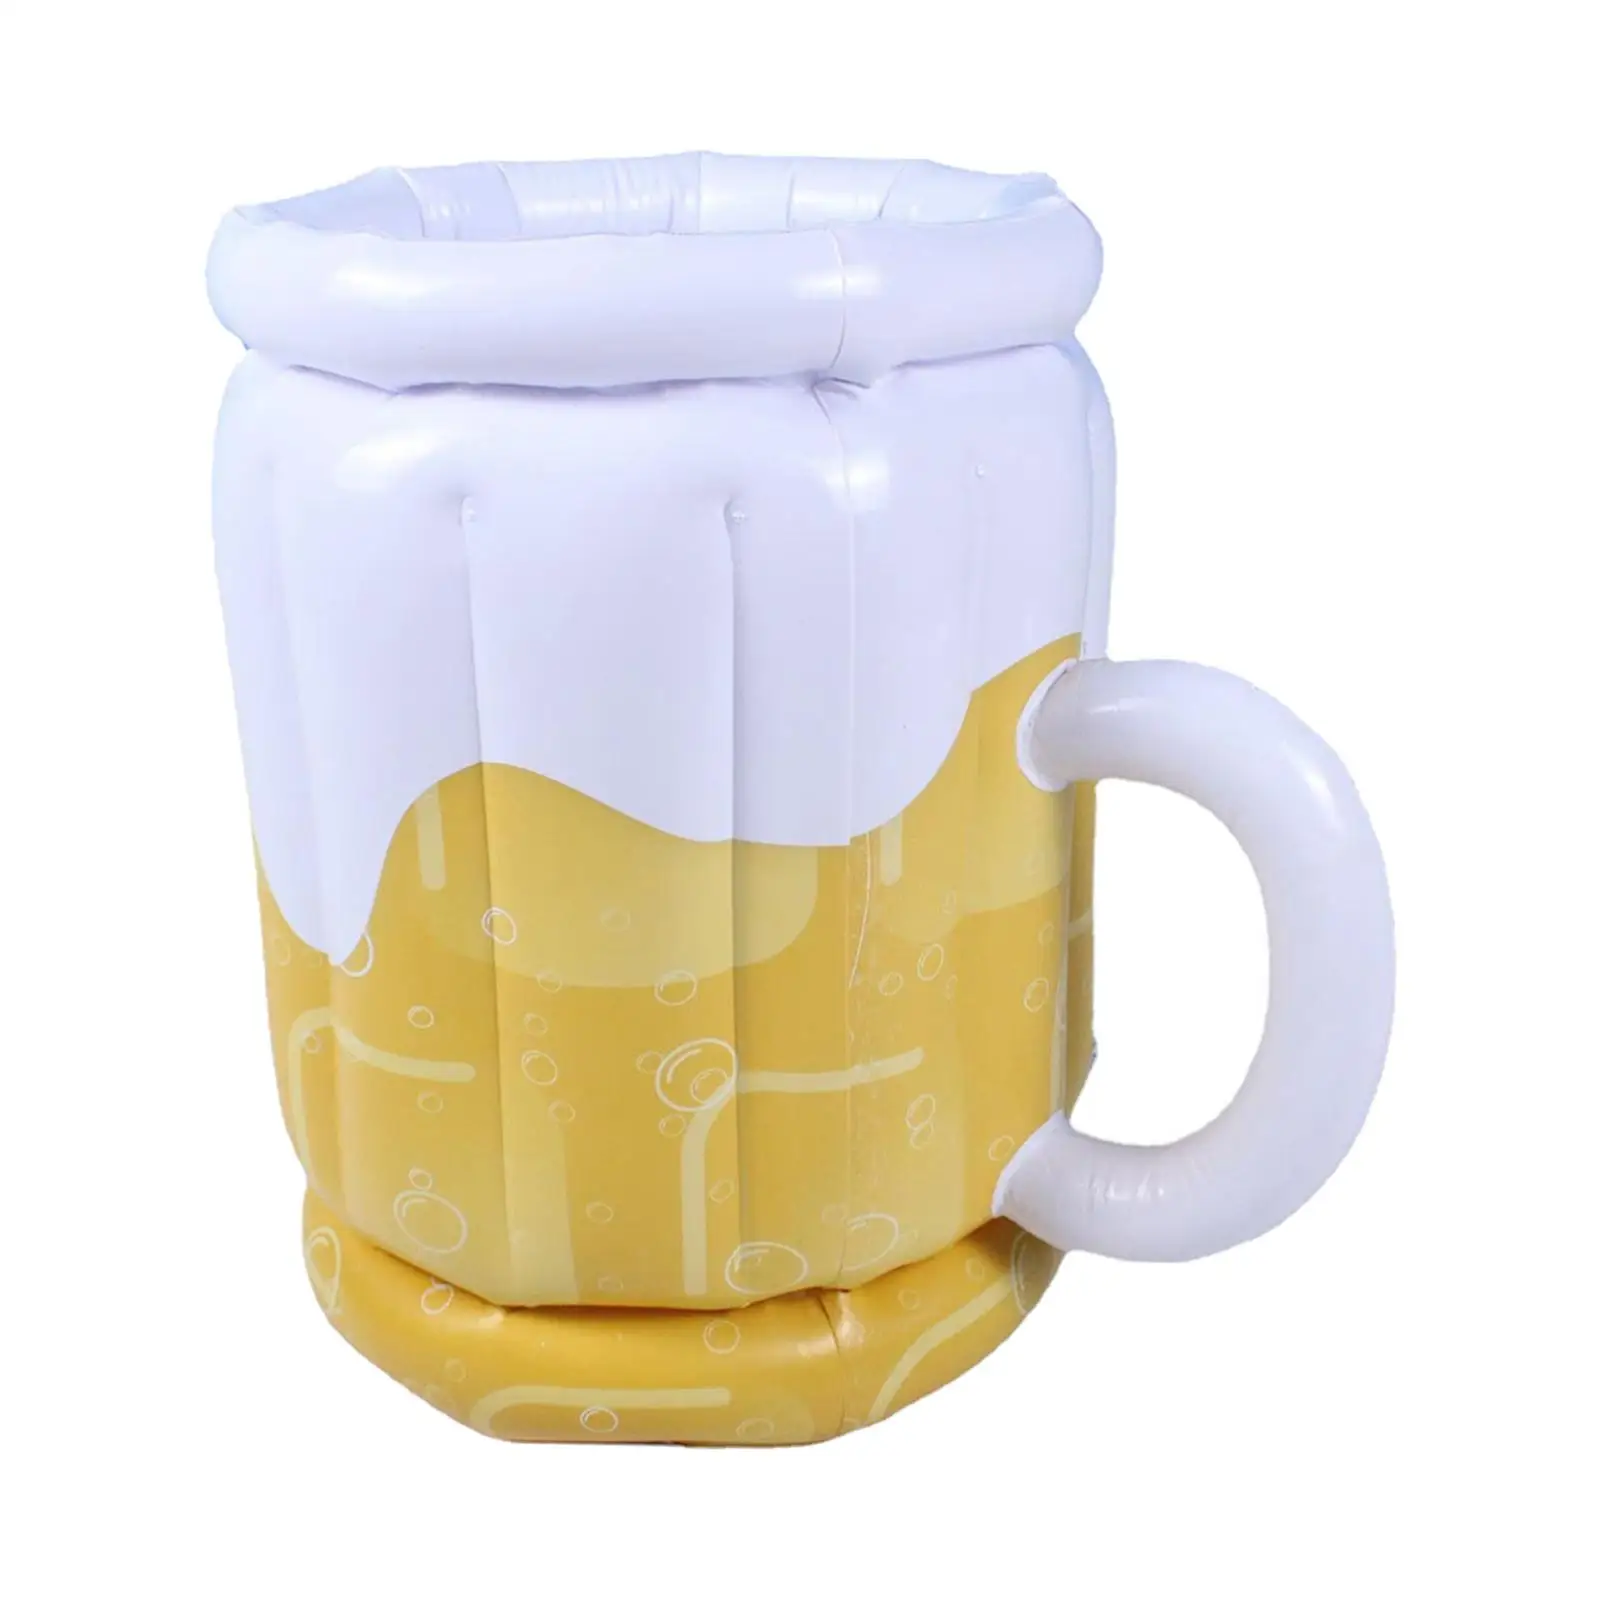 Inflatable Cooler Beverage Holder for Pool Party Decorations BBQ Beach